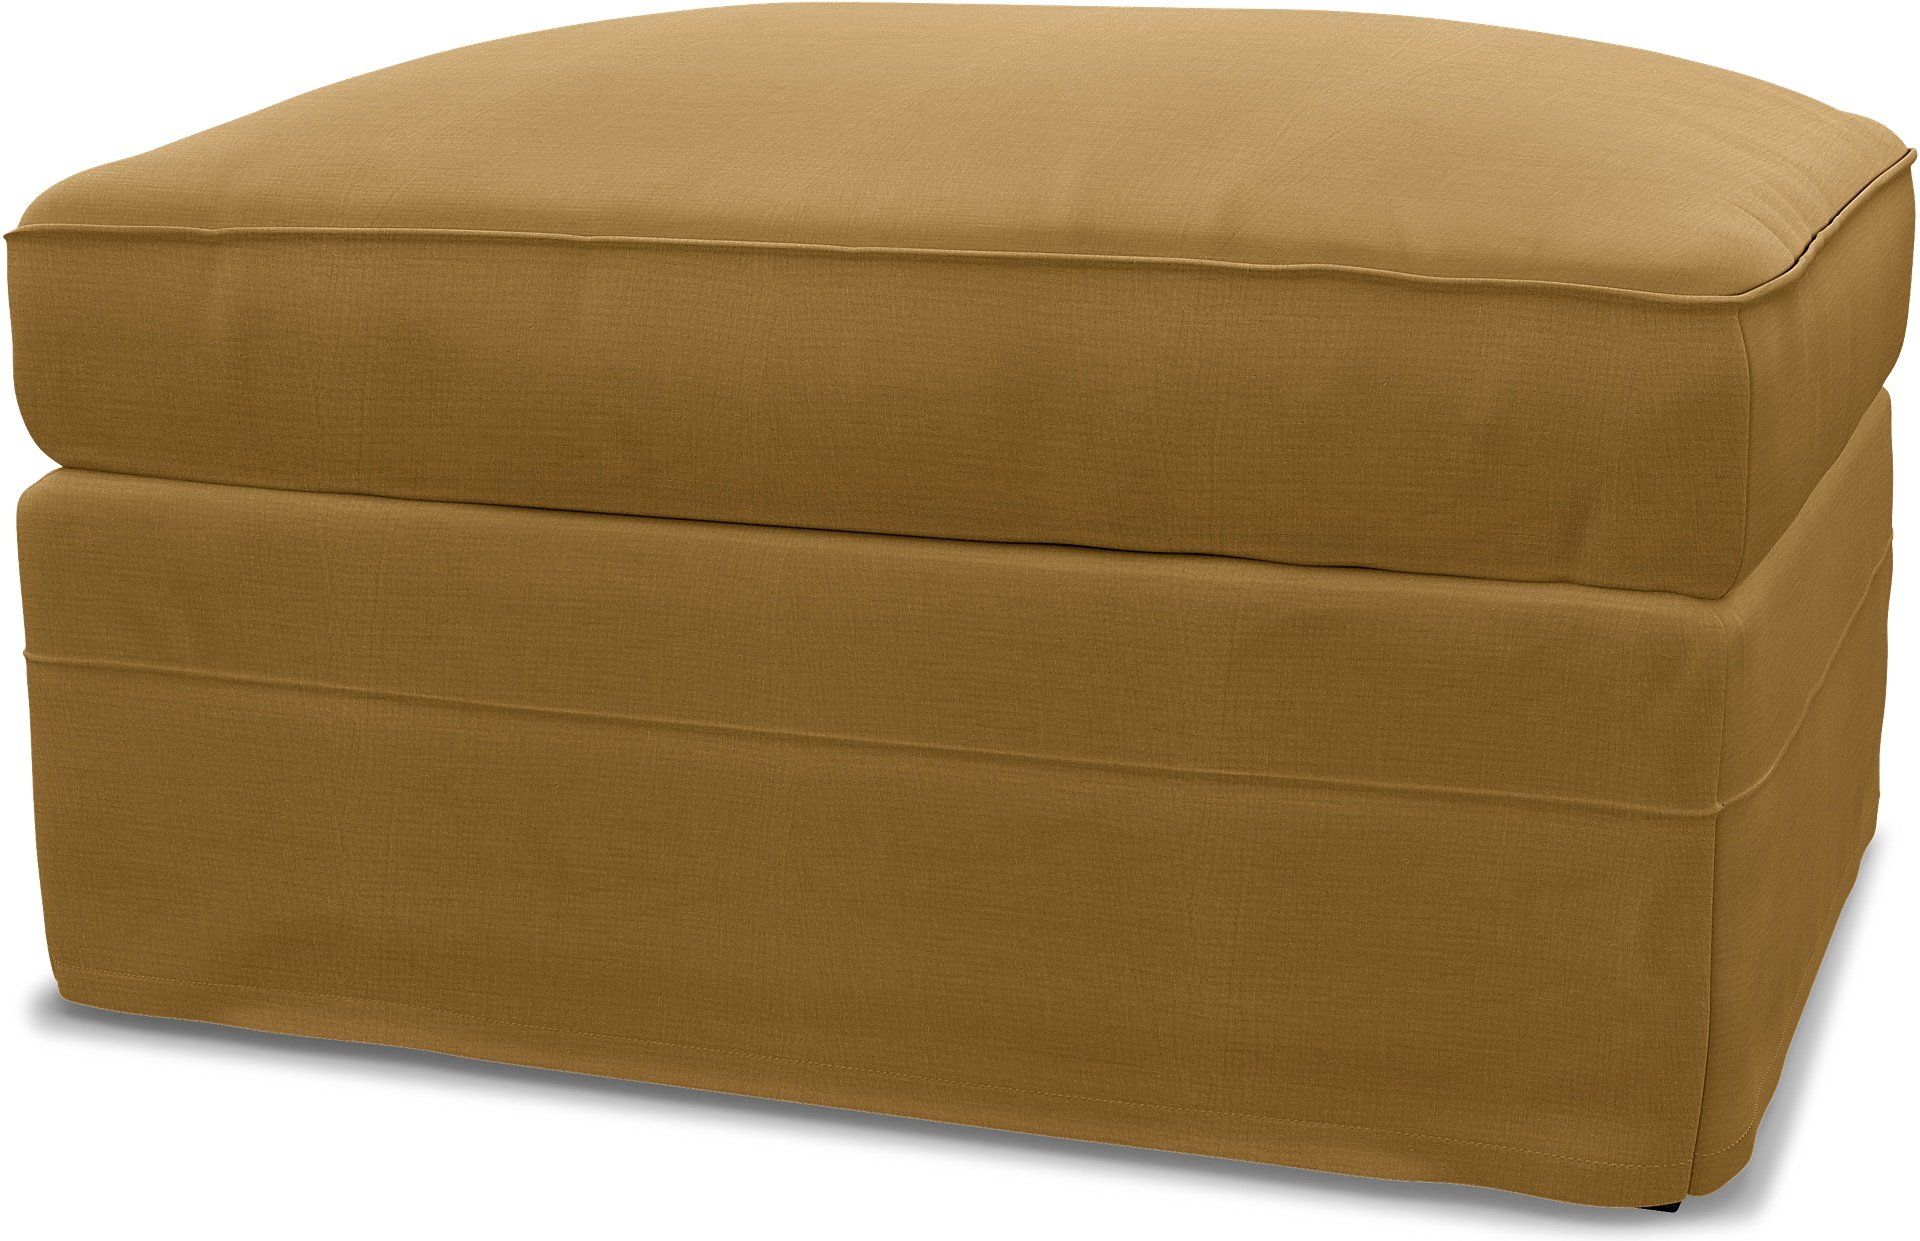 IKEA - Gronlid Footstool with Storage Cover, Dusty Yellow, Linen - Bemz